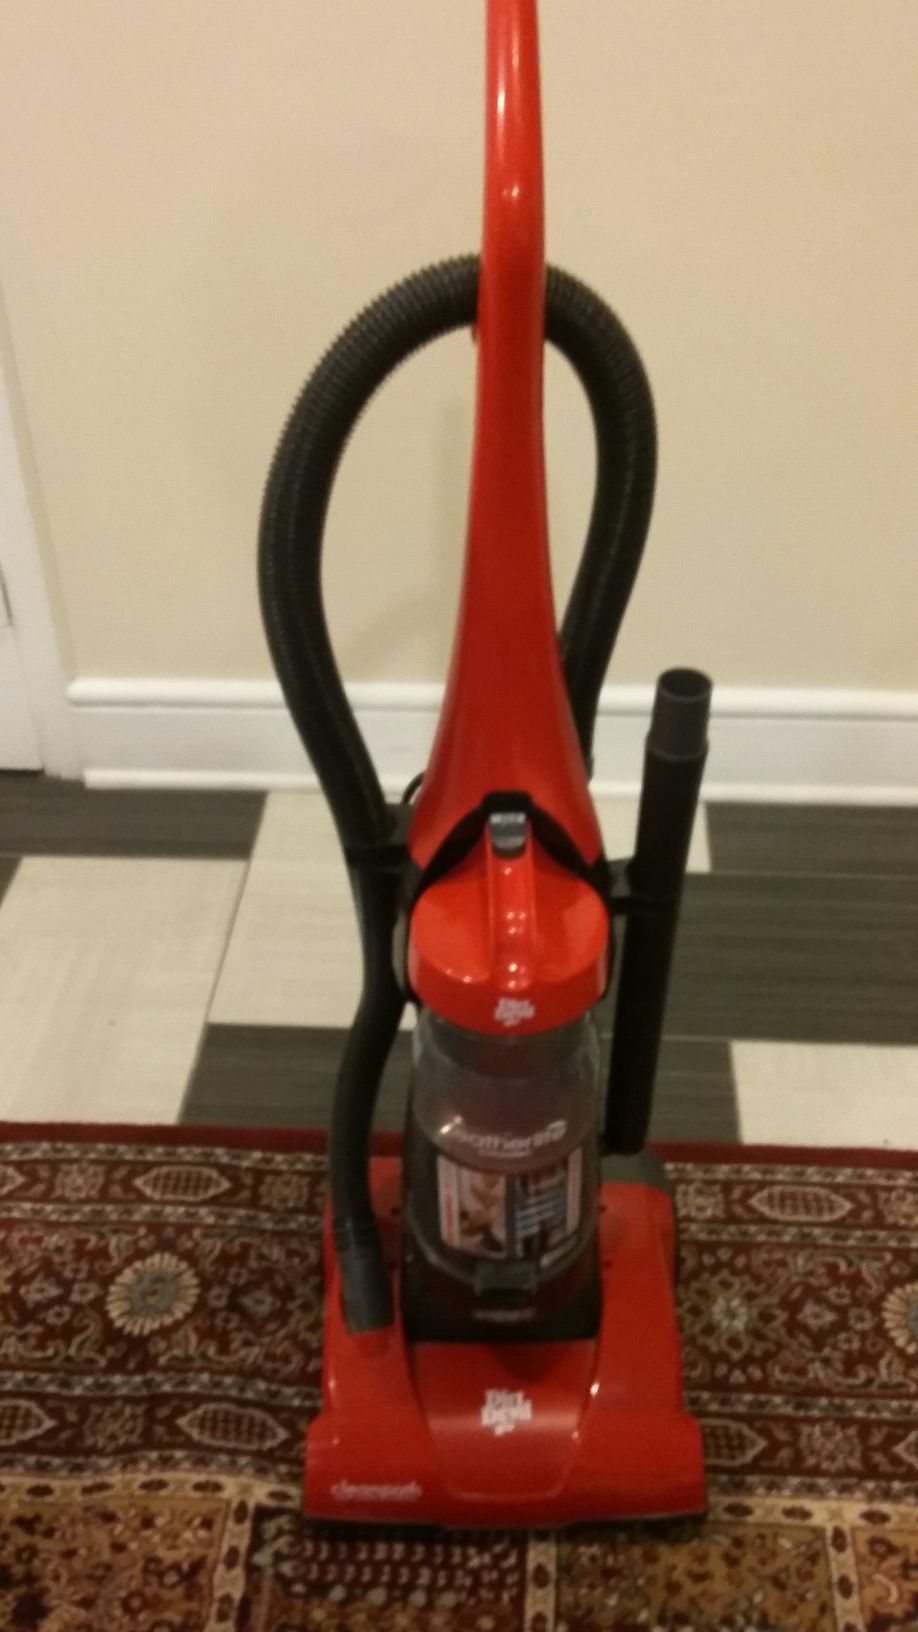 NICE DIRT DEVIL FEATHERLITE CYCLONIC PERFORMANCE BAGLESS VACUUM CLEANER EXCELLENT CONDITION LIKE NEW